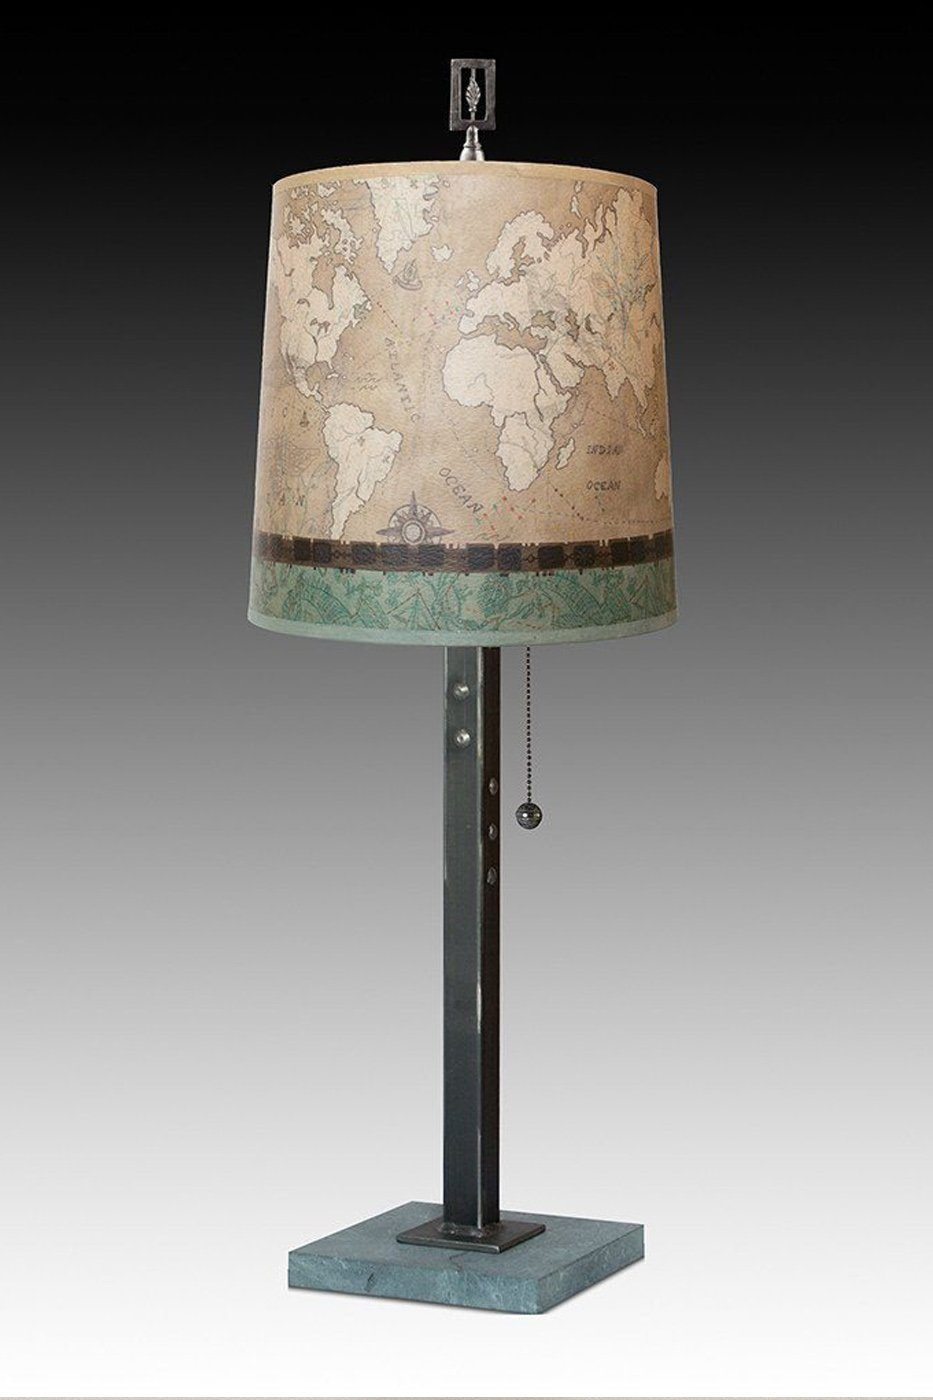 Janna Ugone &amp; Co Table Lamps Steel Table Lamp with Medium Drum Shade in Voyages